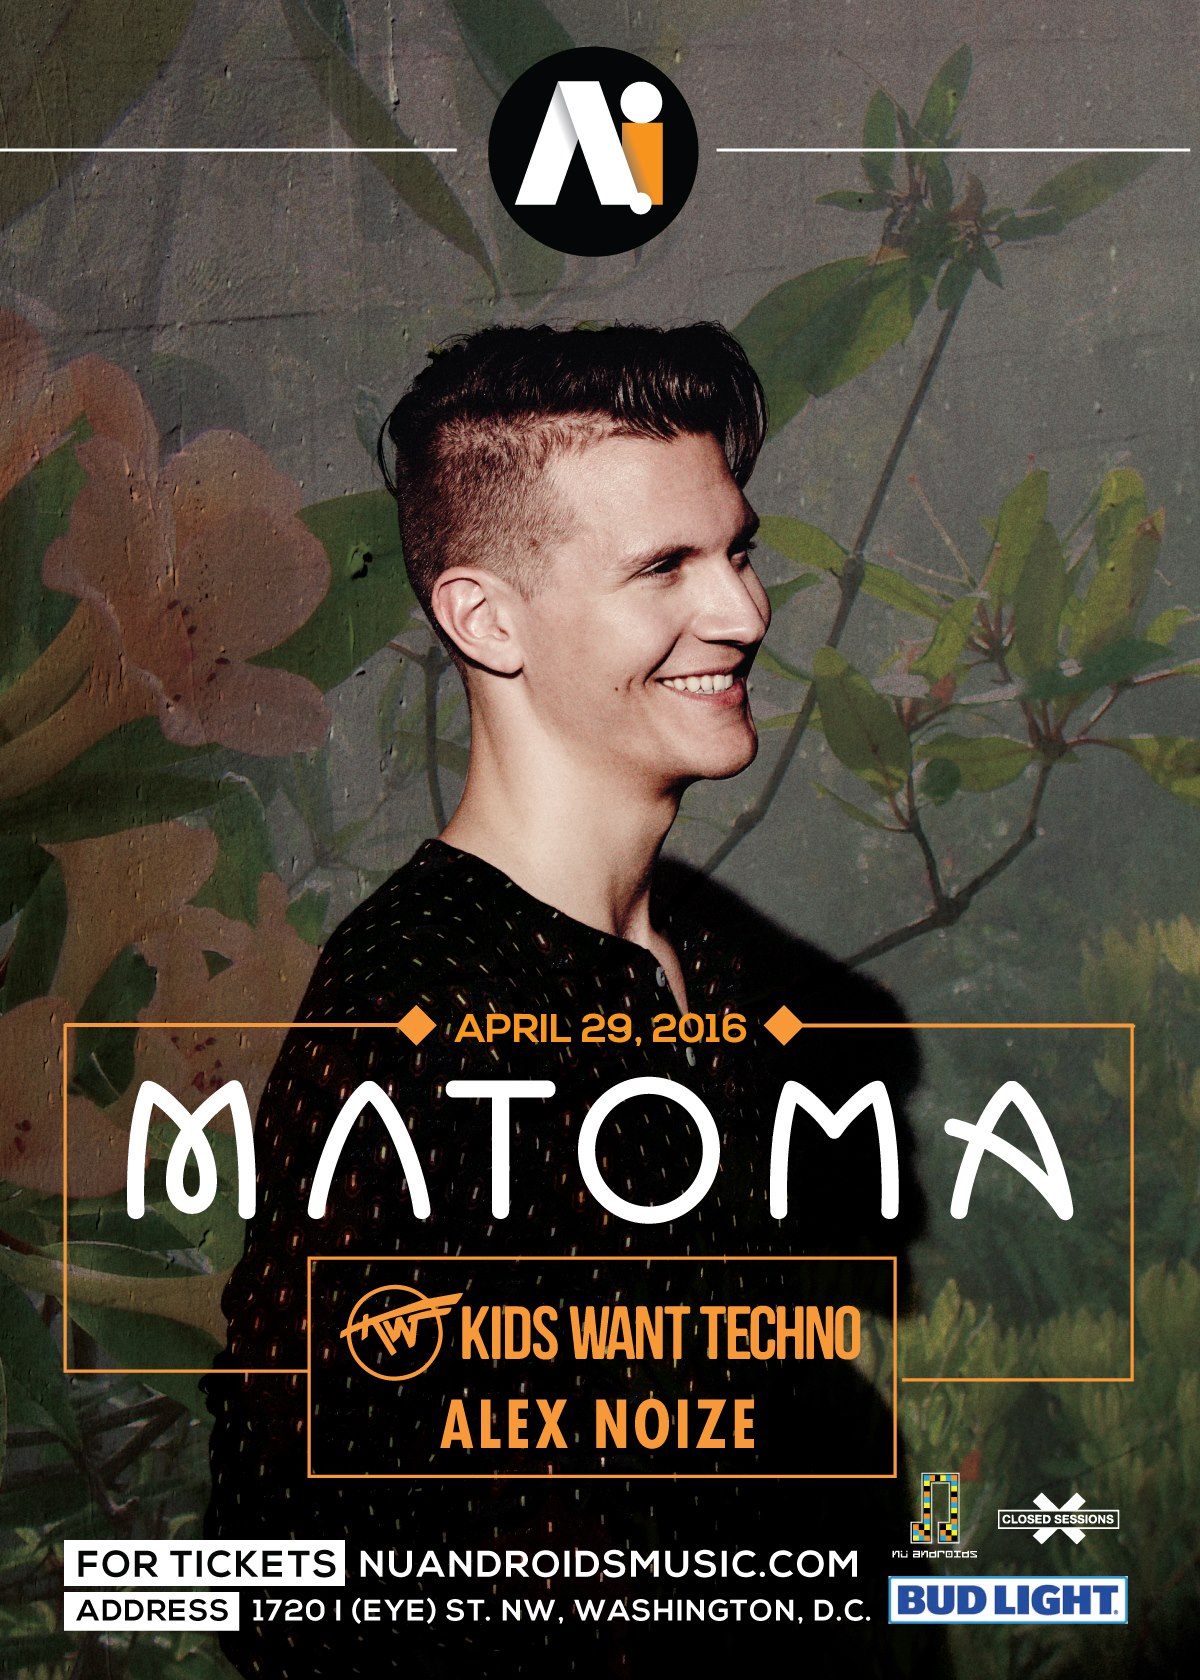 A DC Event You’d Be Crazy to Miss: Matoma at A.i. [Event Preview]